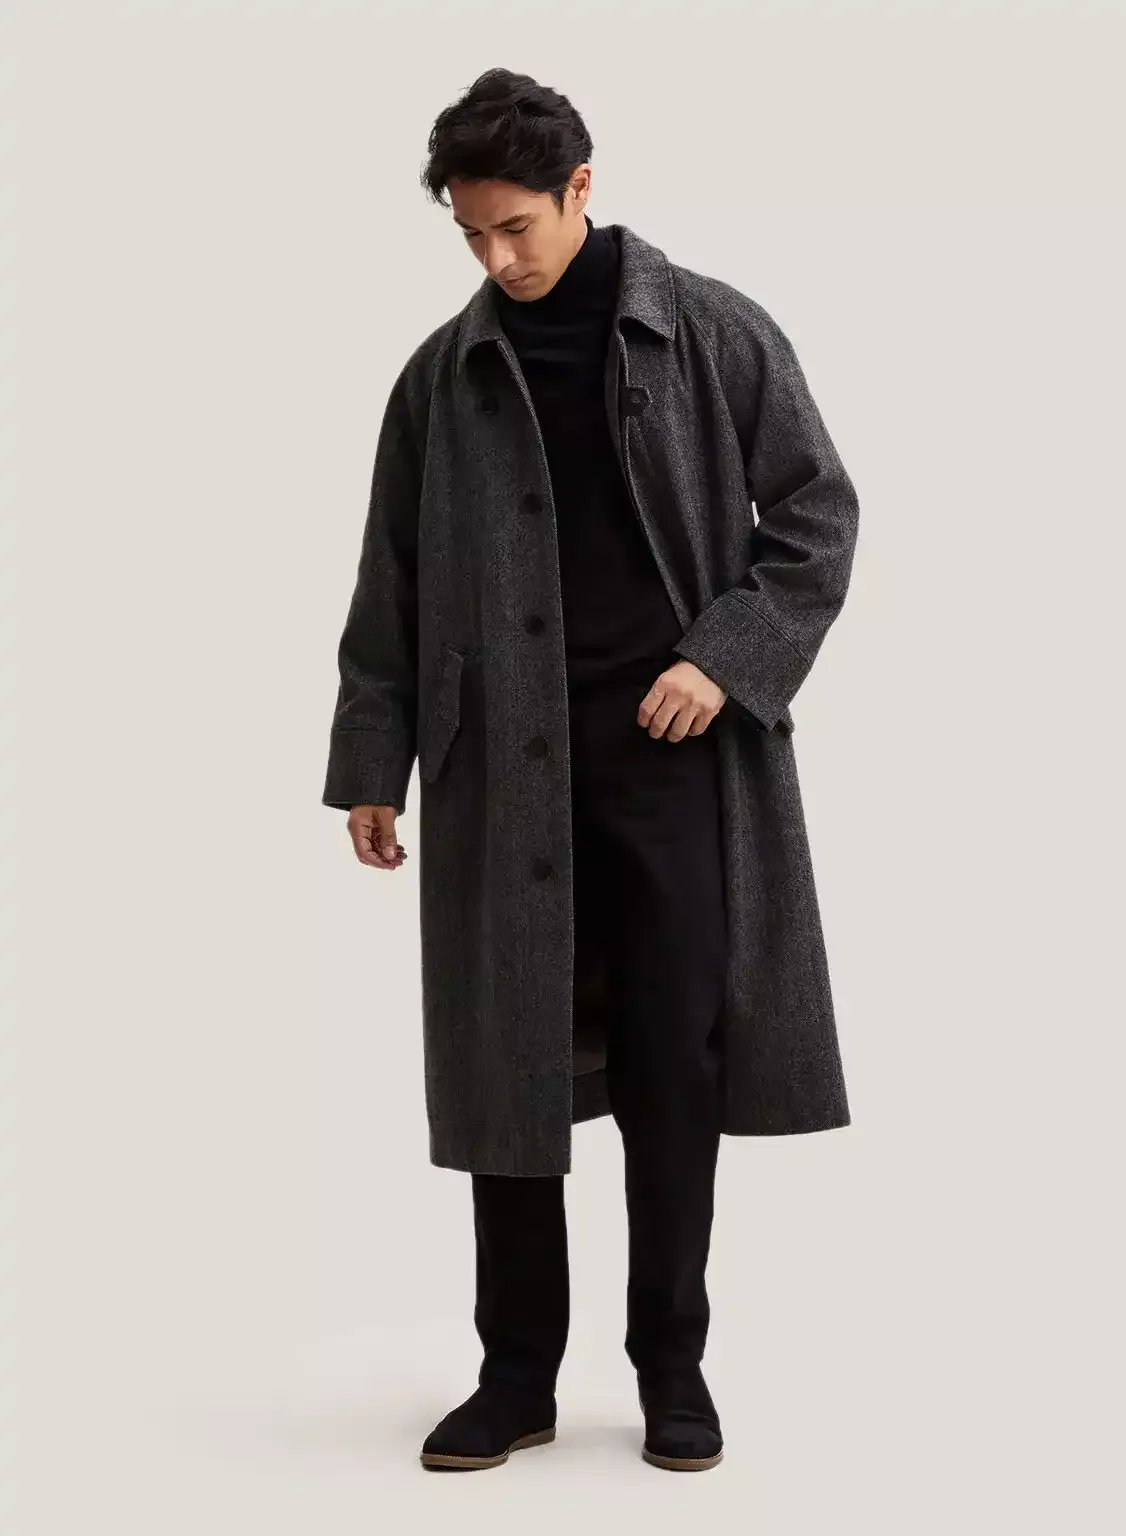 Why Men Love Trench Coats